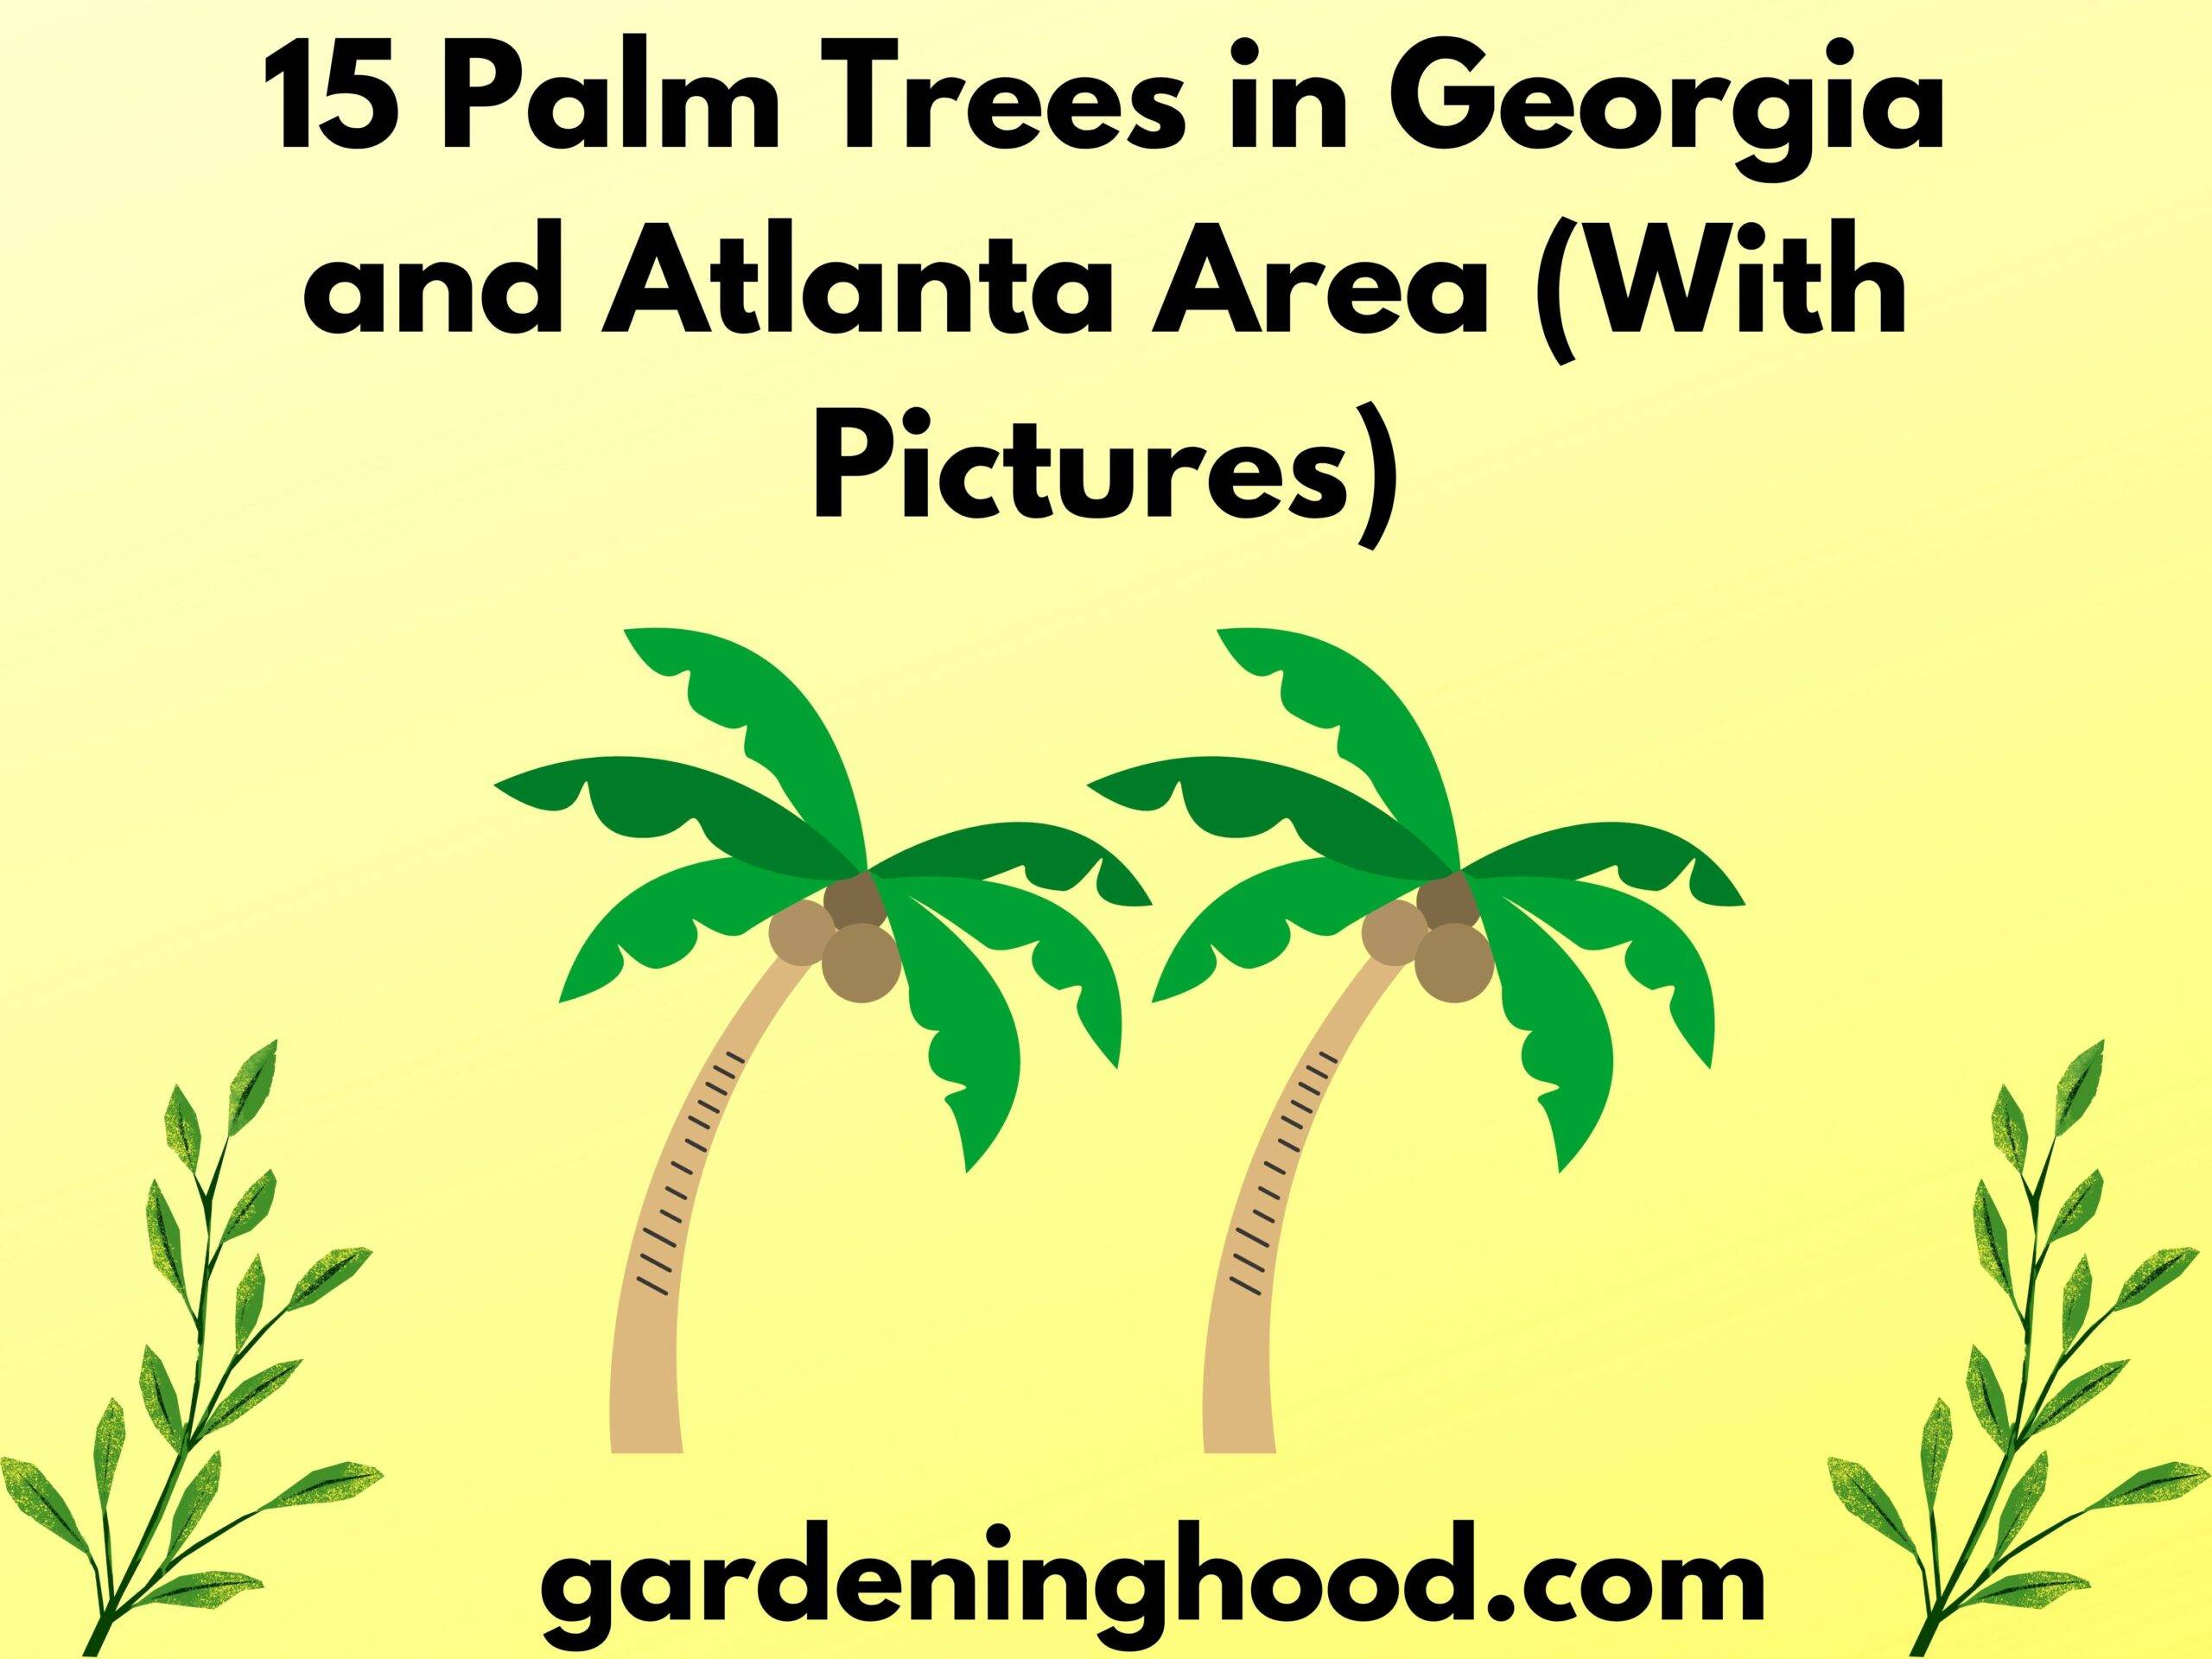 15 Palm Trees in Georgia and Atlanta Area (With Pictures)